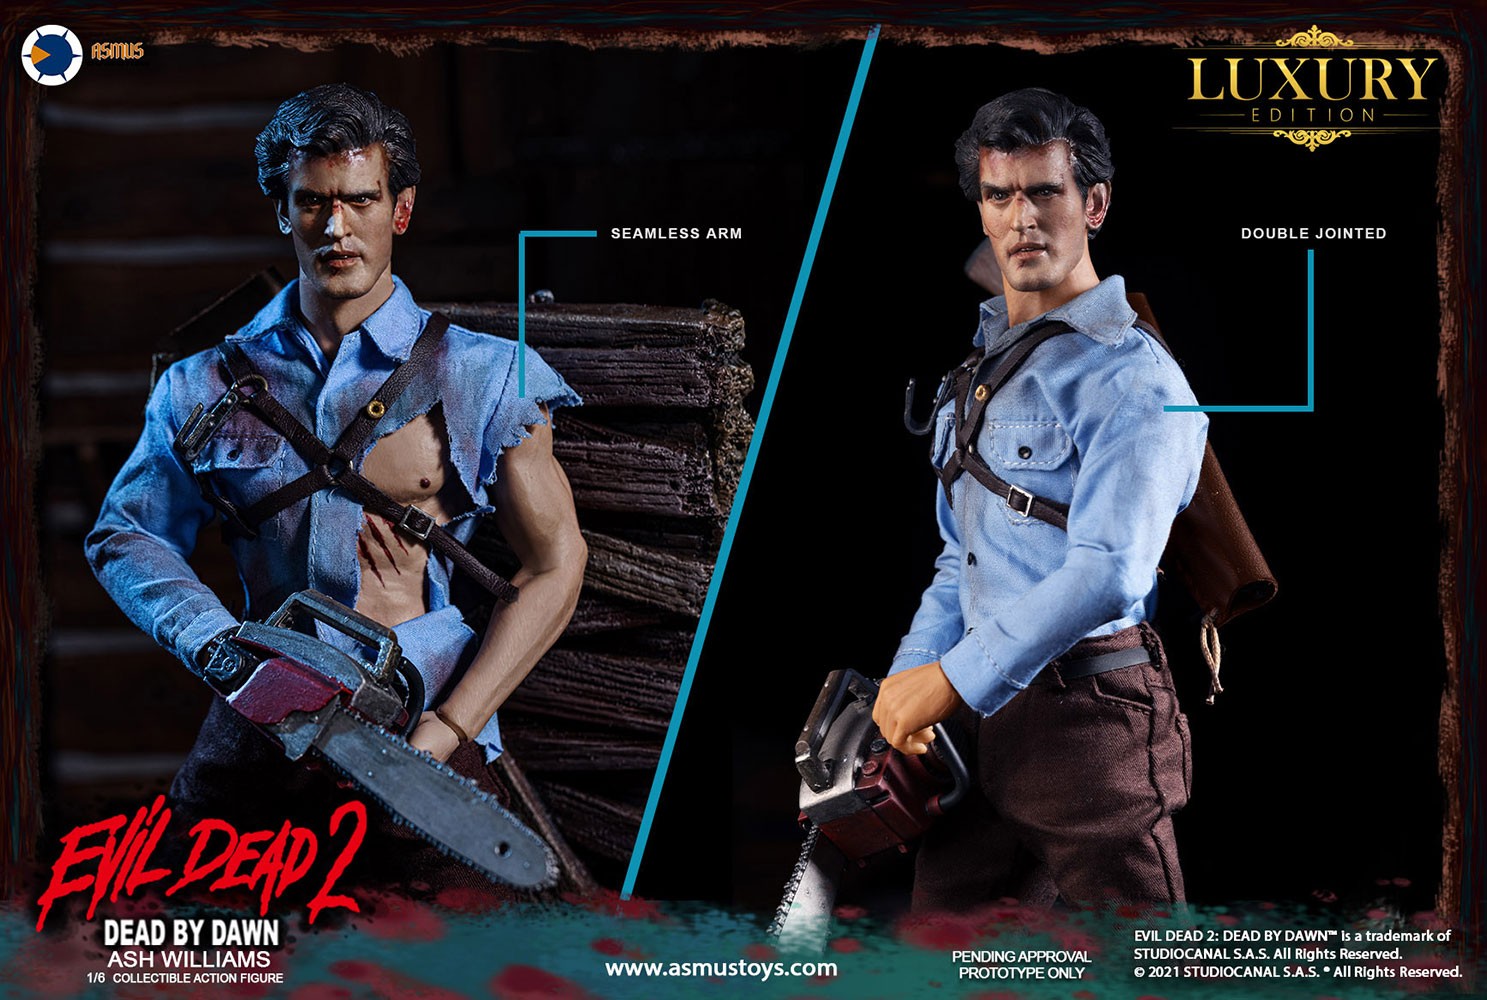 Ash Williams (Luxury Edition) Exclusive Edition (Prototype Shown) View 8